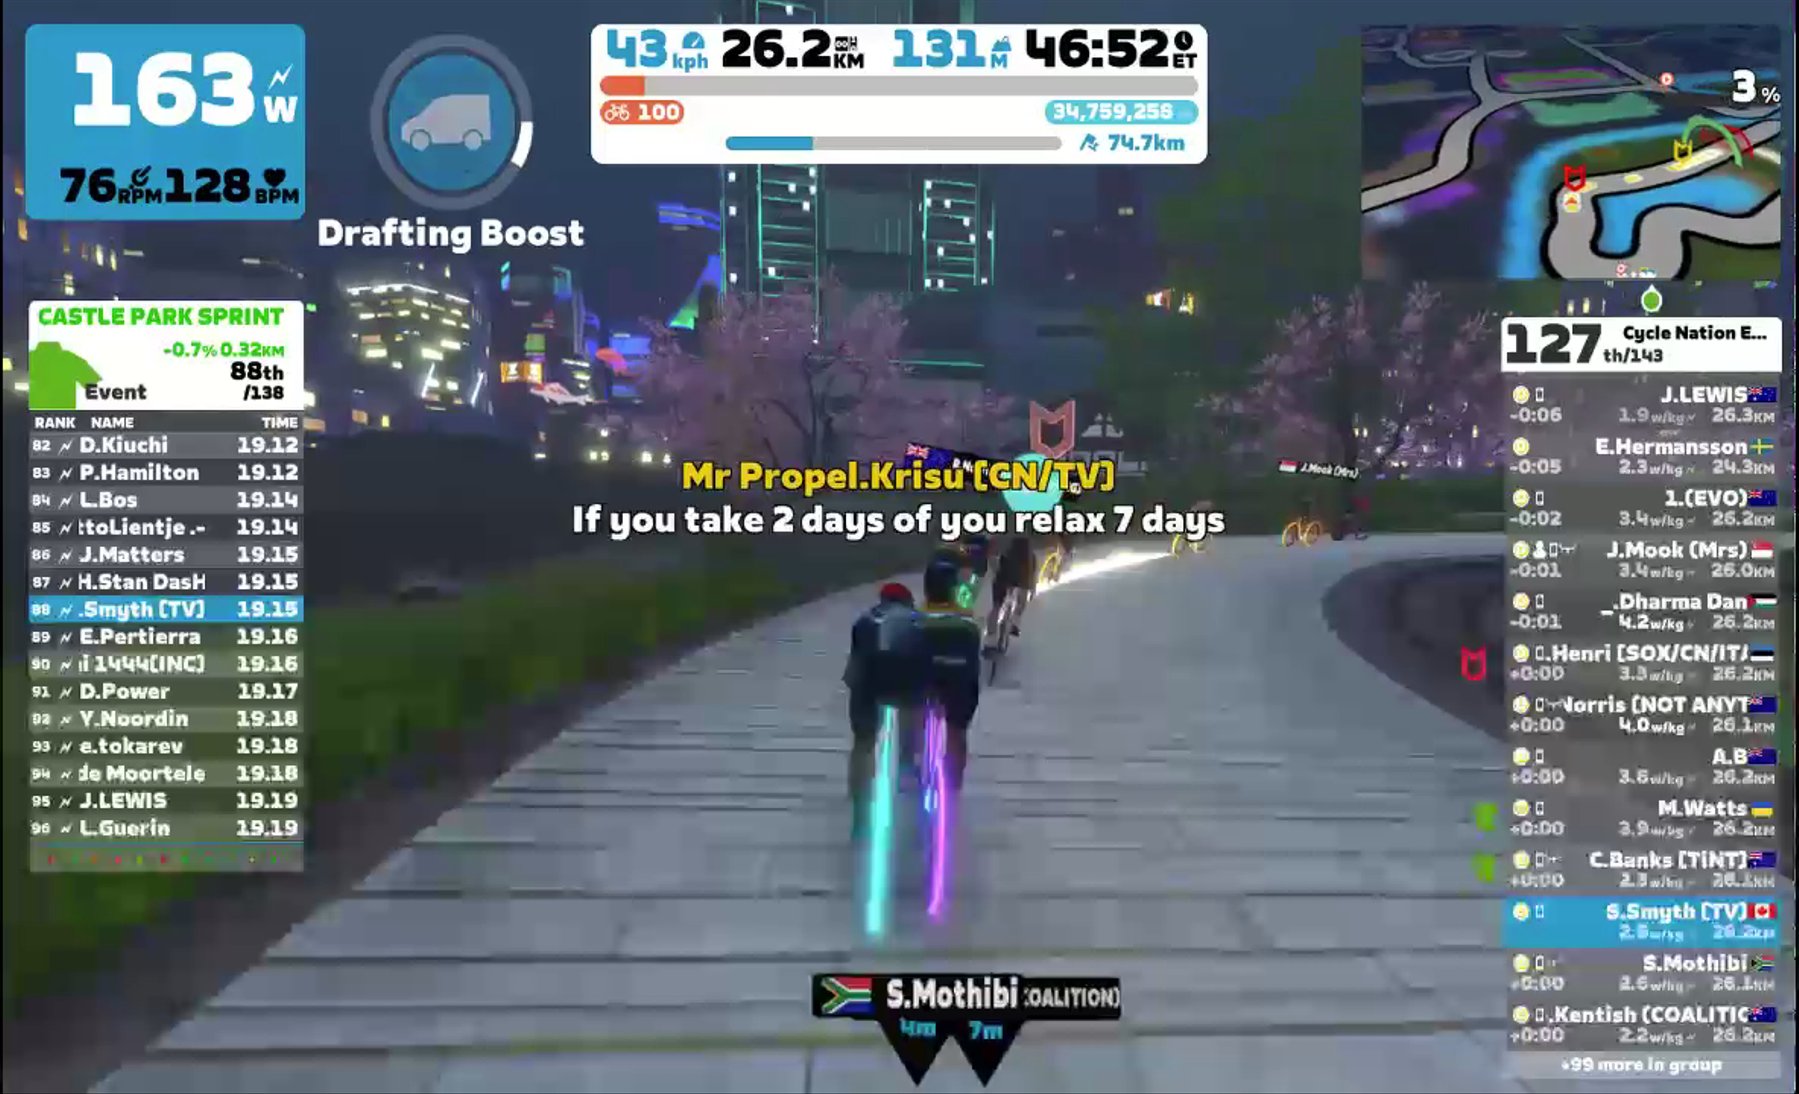 Zwift - Group Ride: Cycle Nation Endurance Ride (D) on Neon Flats in Makuri Islands